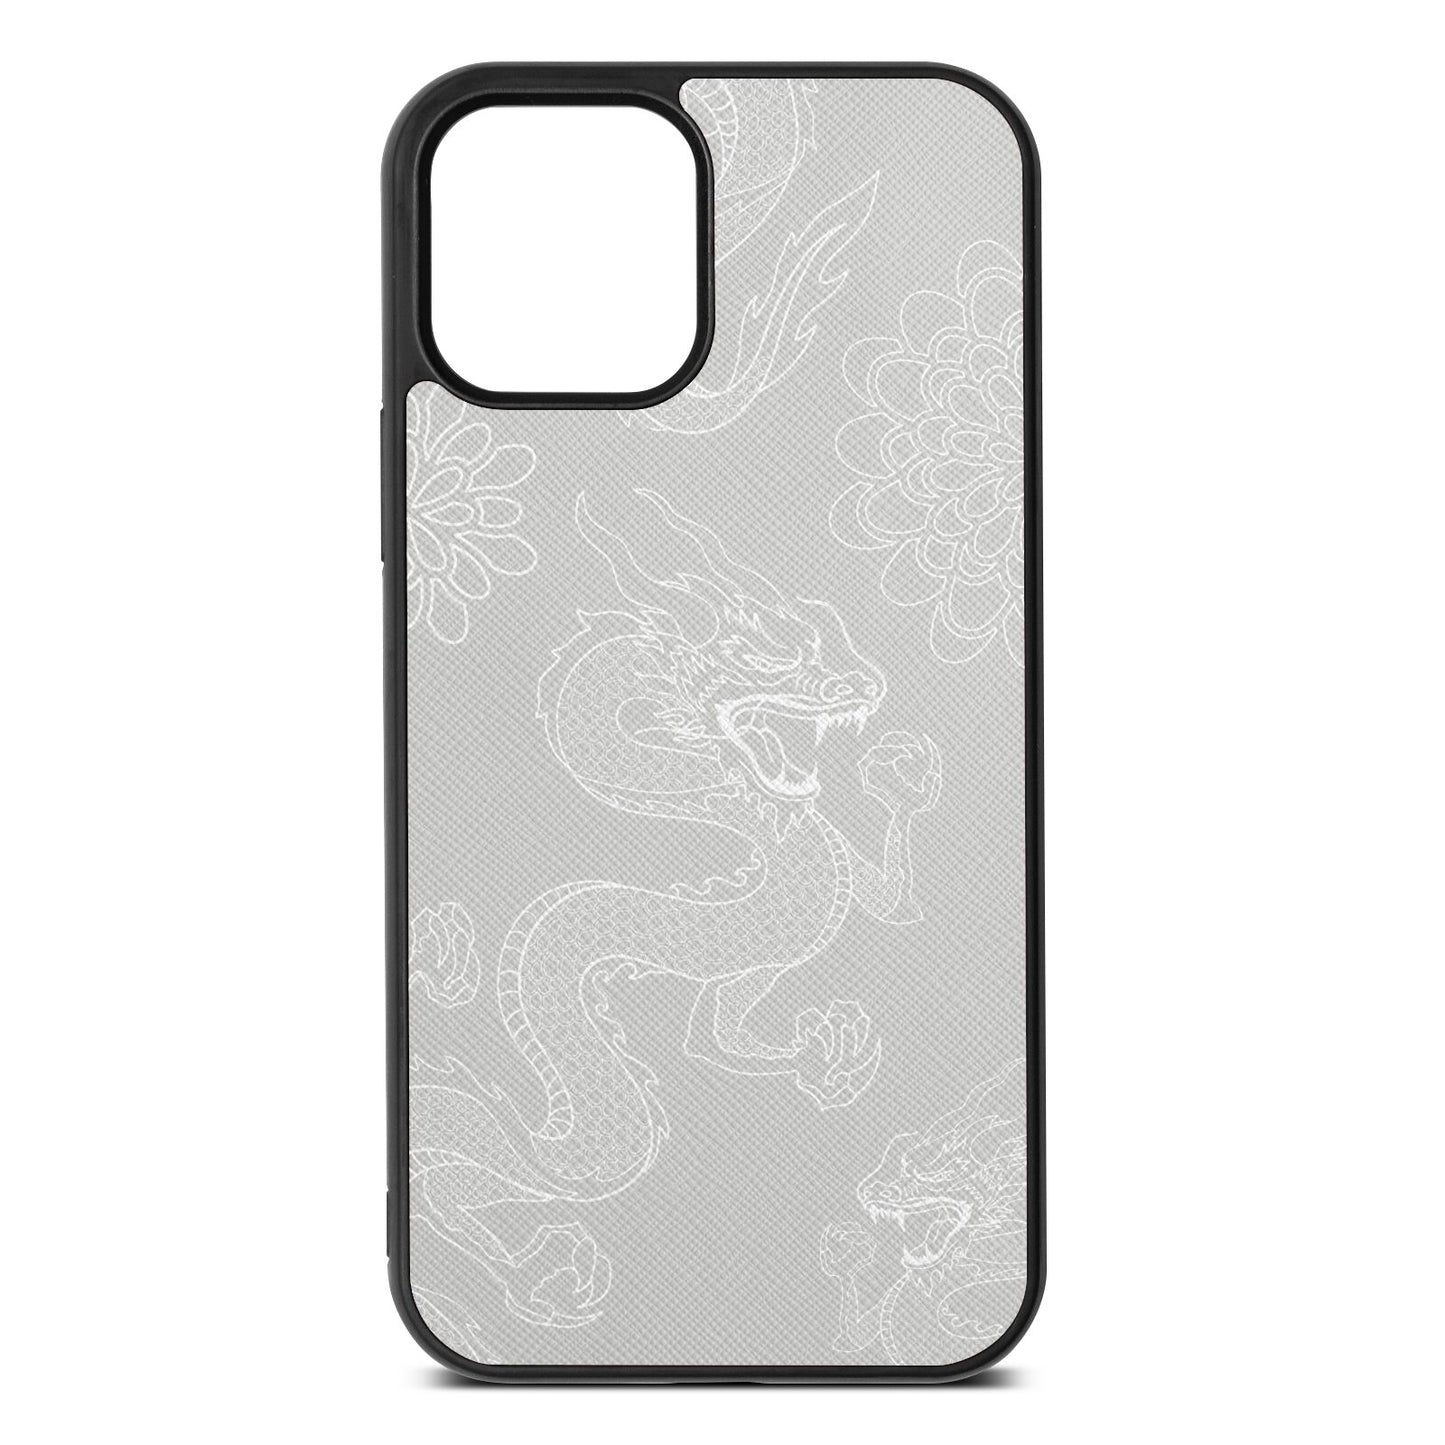 Dragons Silver Saffiano Leather iPhone 12 Case